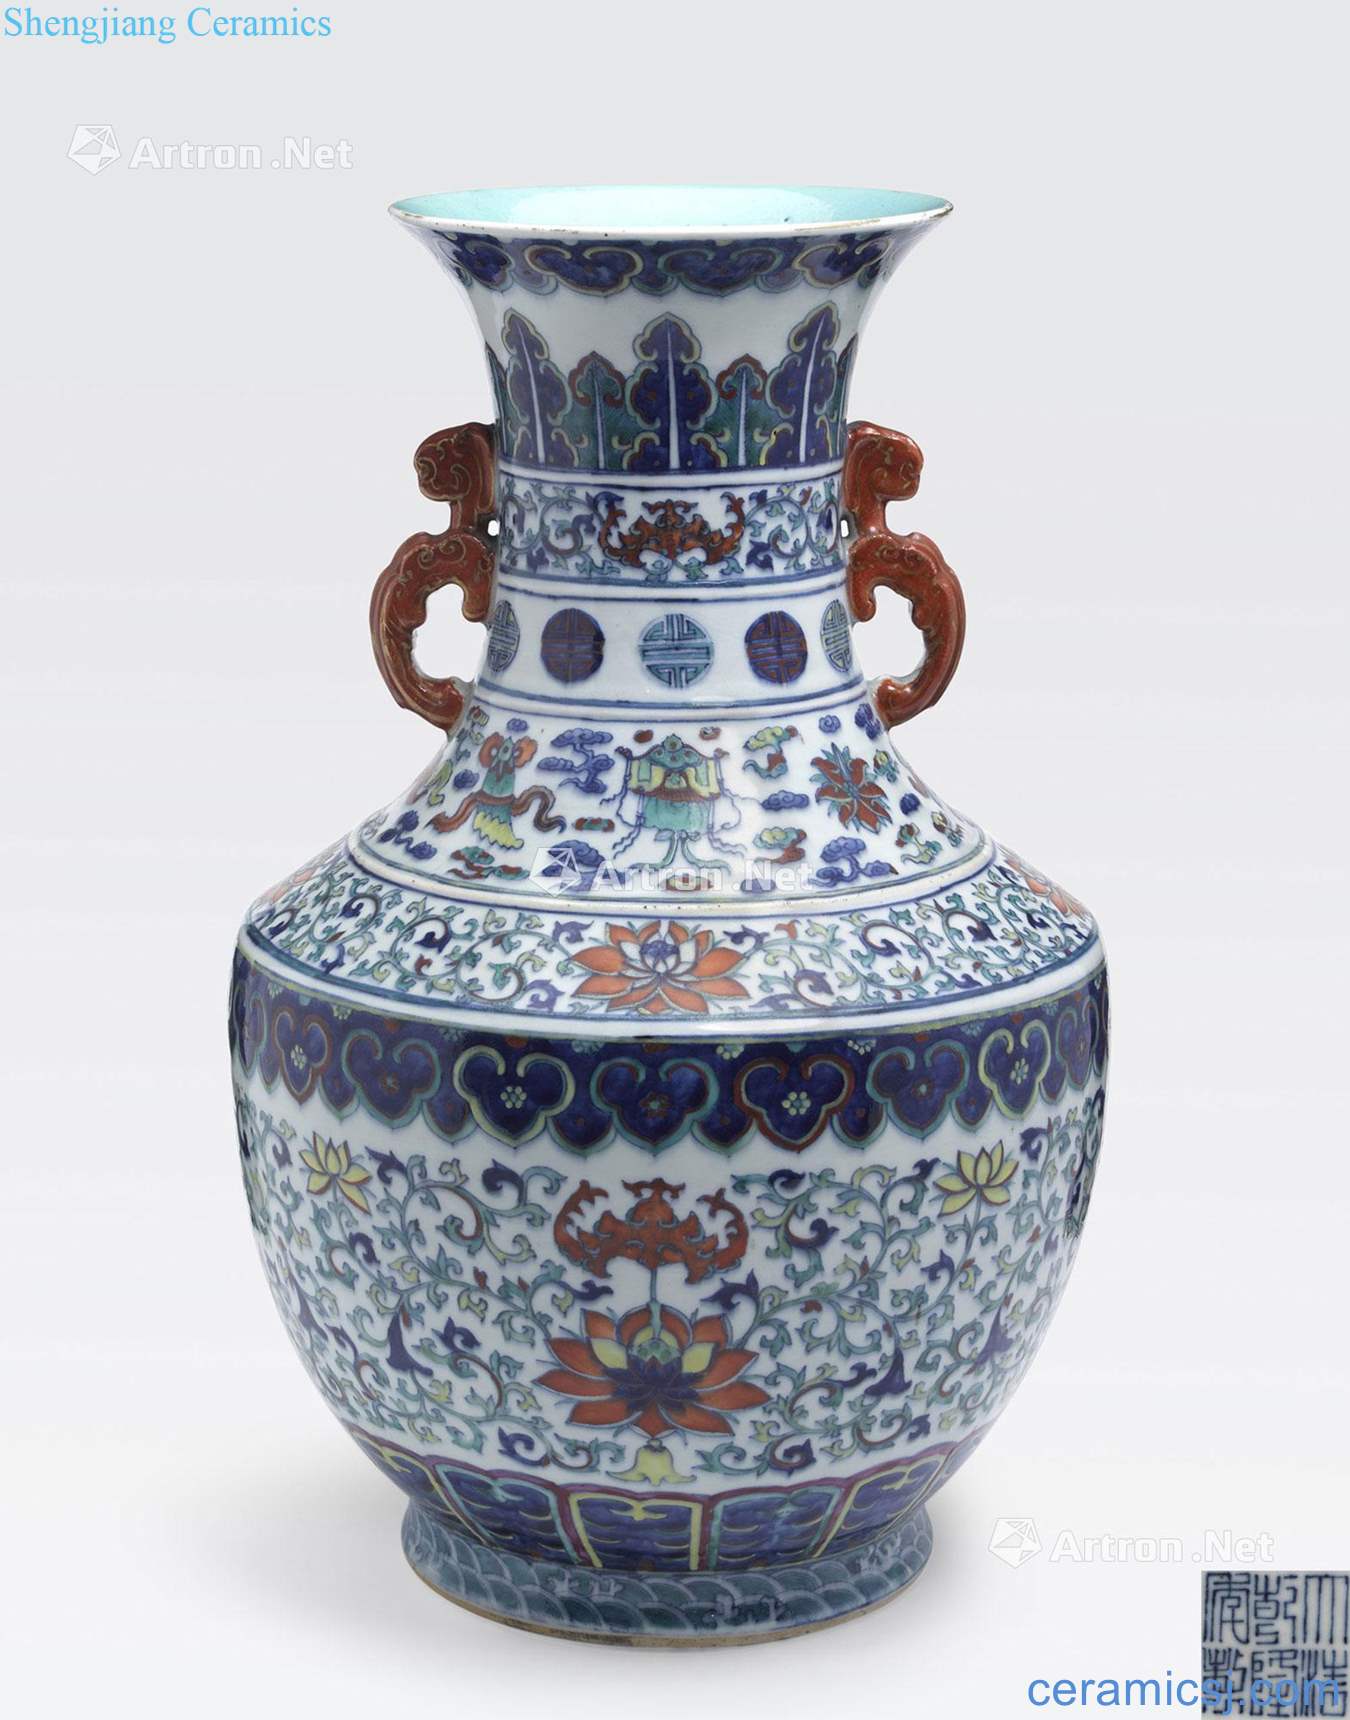 Qianlong mark, newest the Qing/Republic period A DOUCAI DECORATED VASE